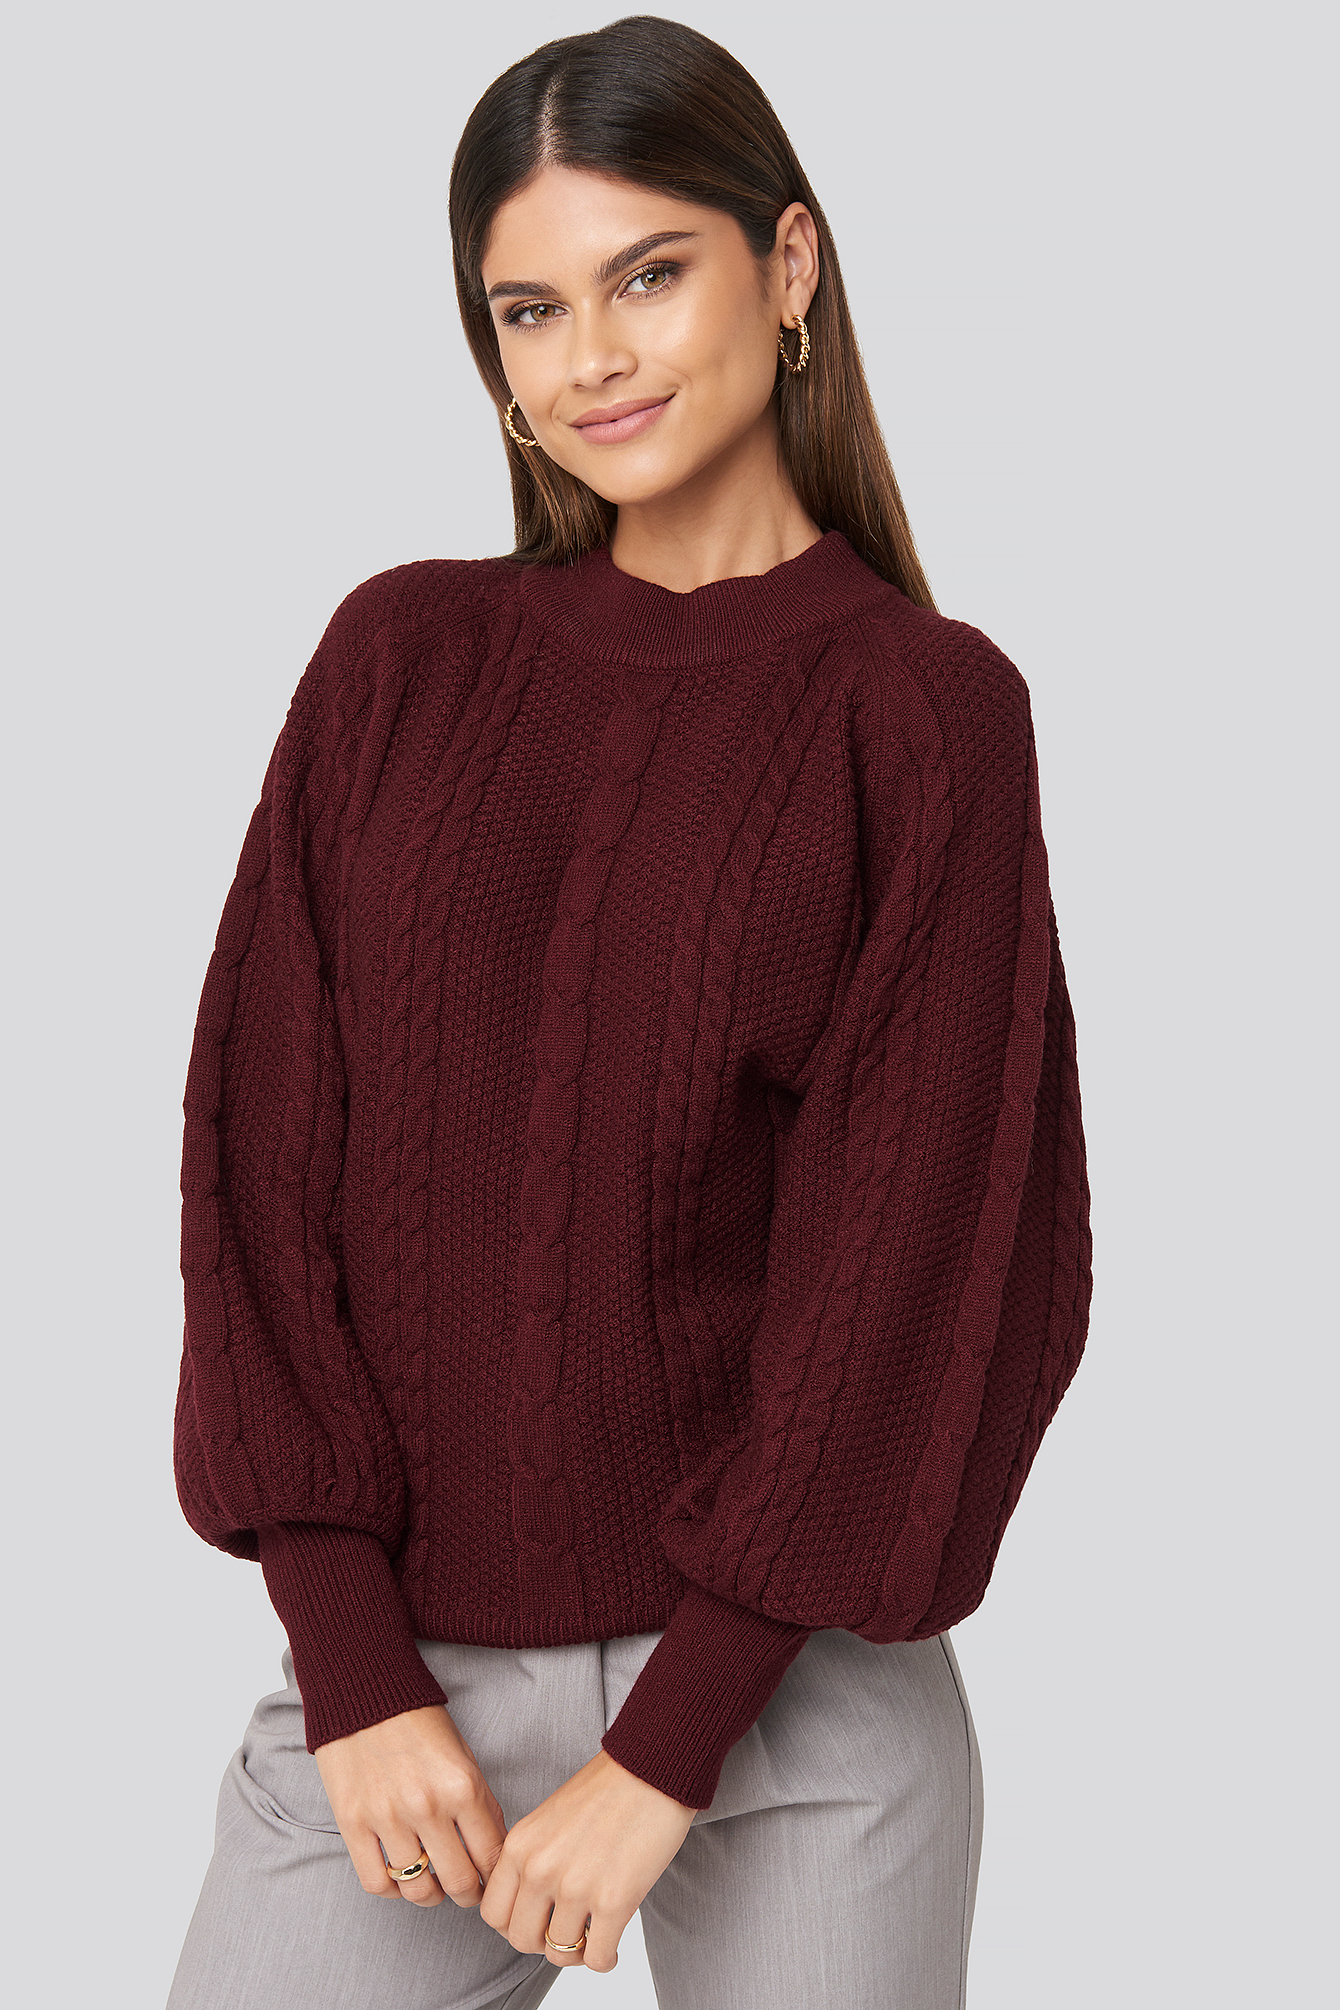 Burgundy Balloon Sleeve Cable Knitted Sweater